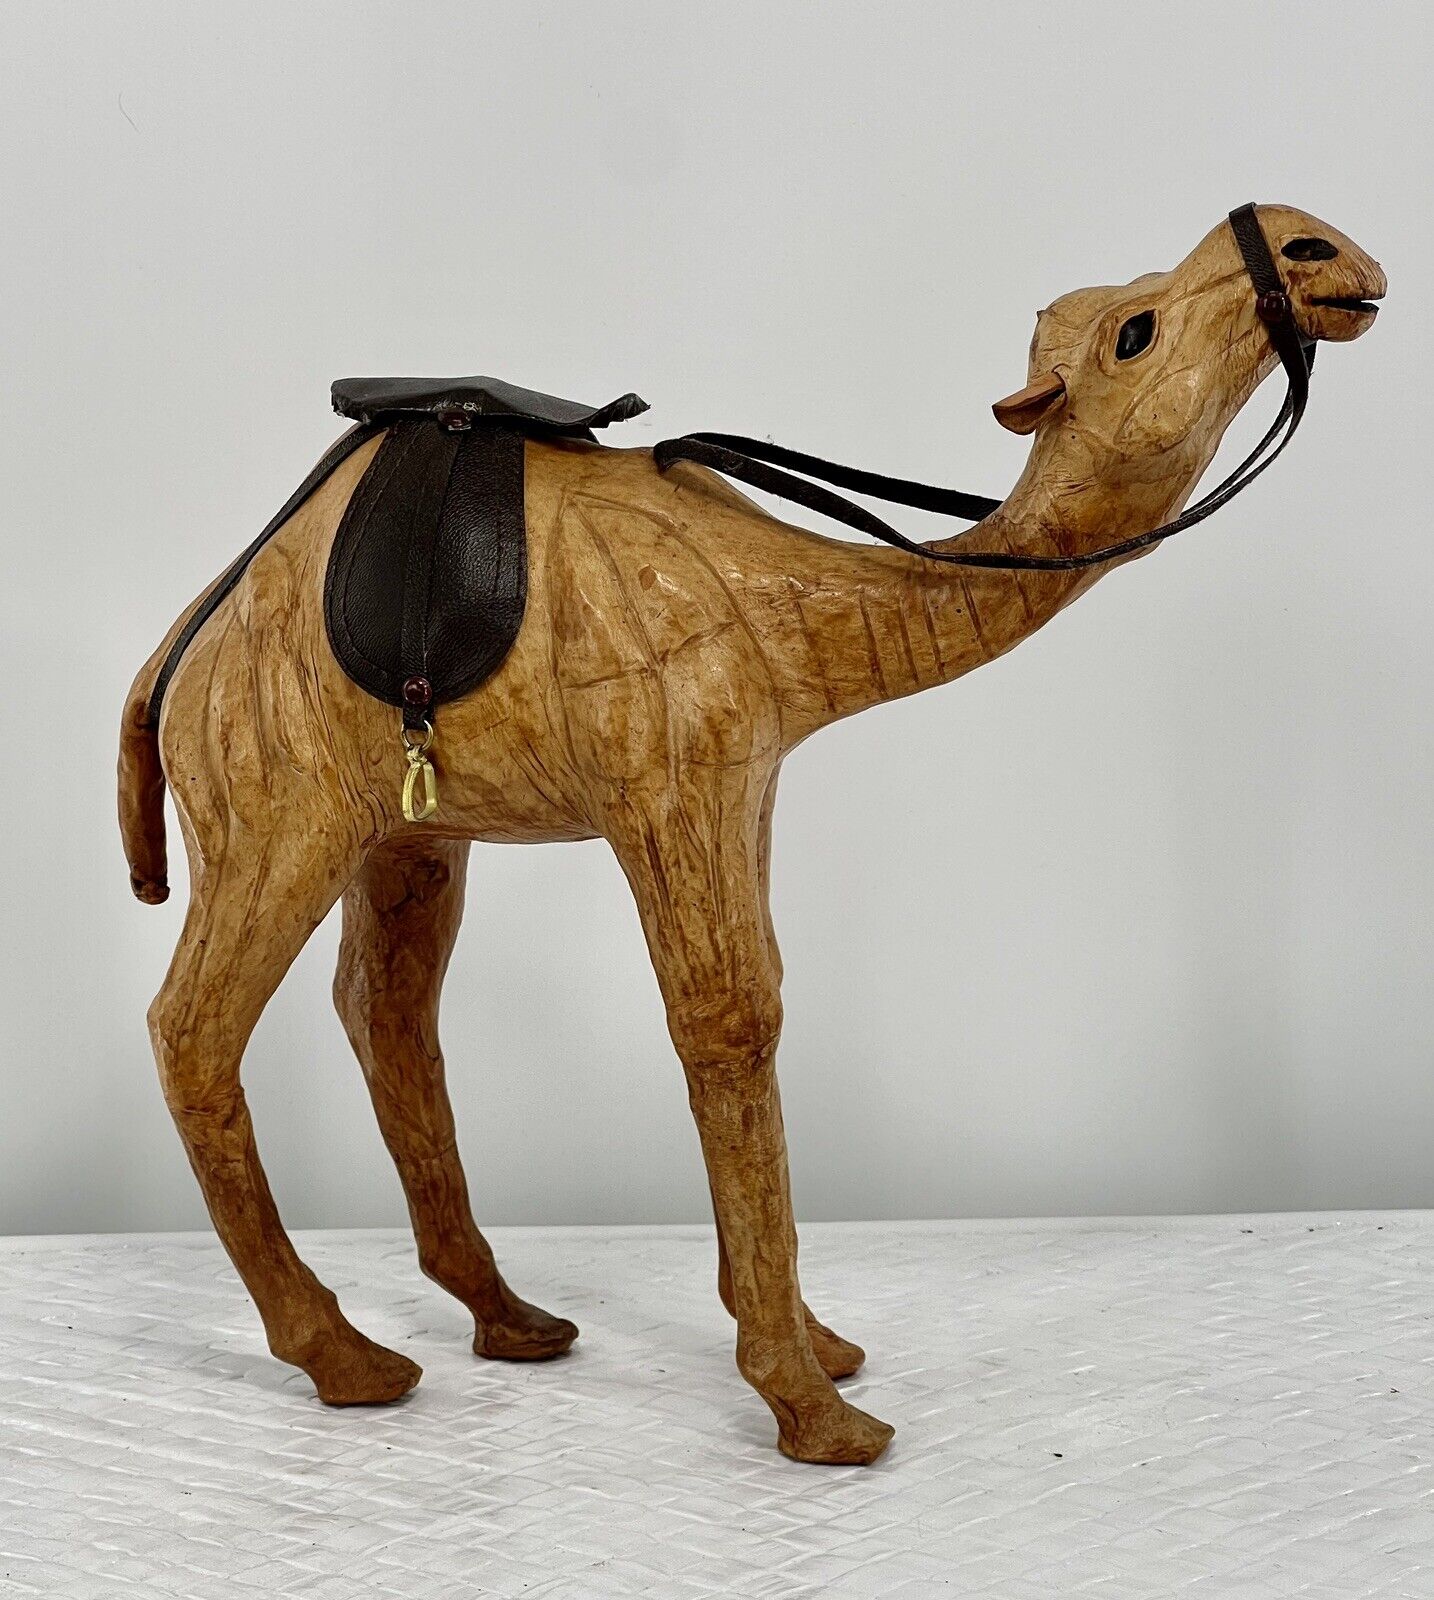 Vintage Leather Wrapped Dromedary Camel Figurine/12”T x 13 1/2” L/Hand Tooled